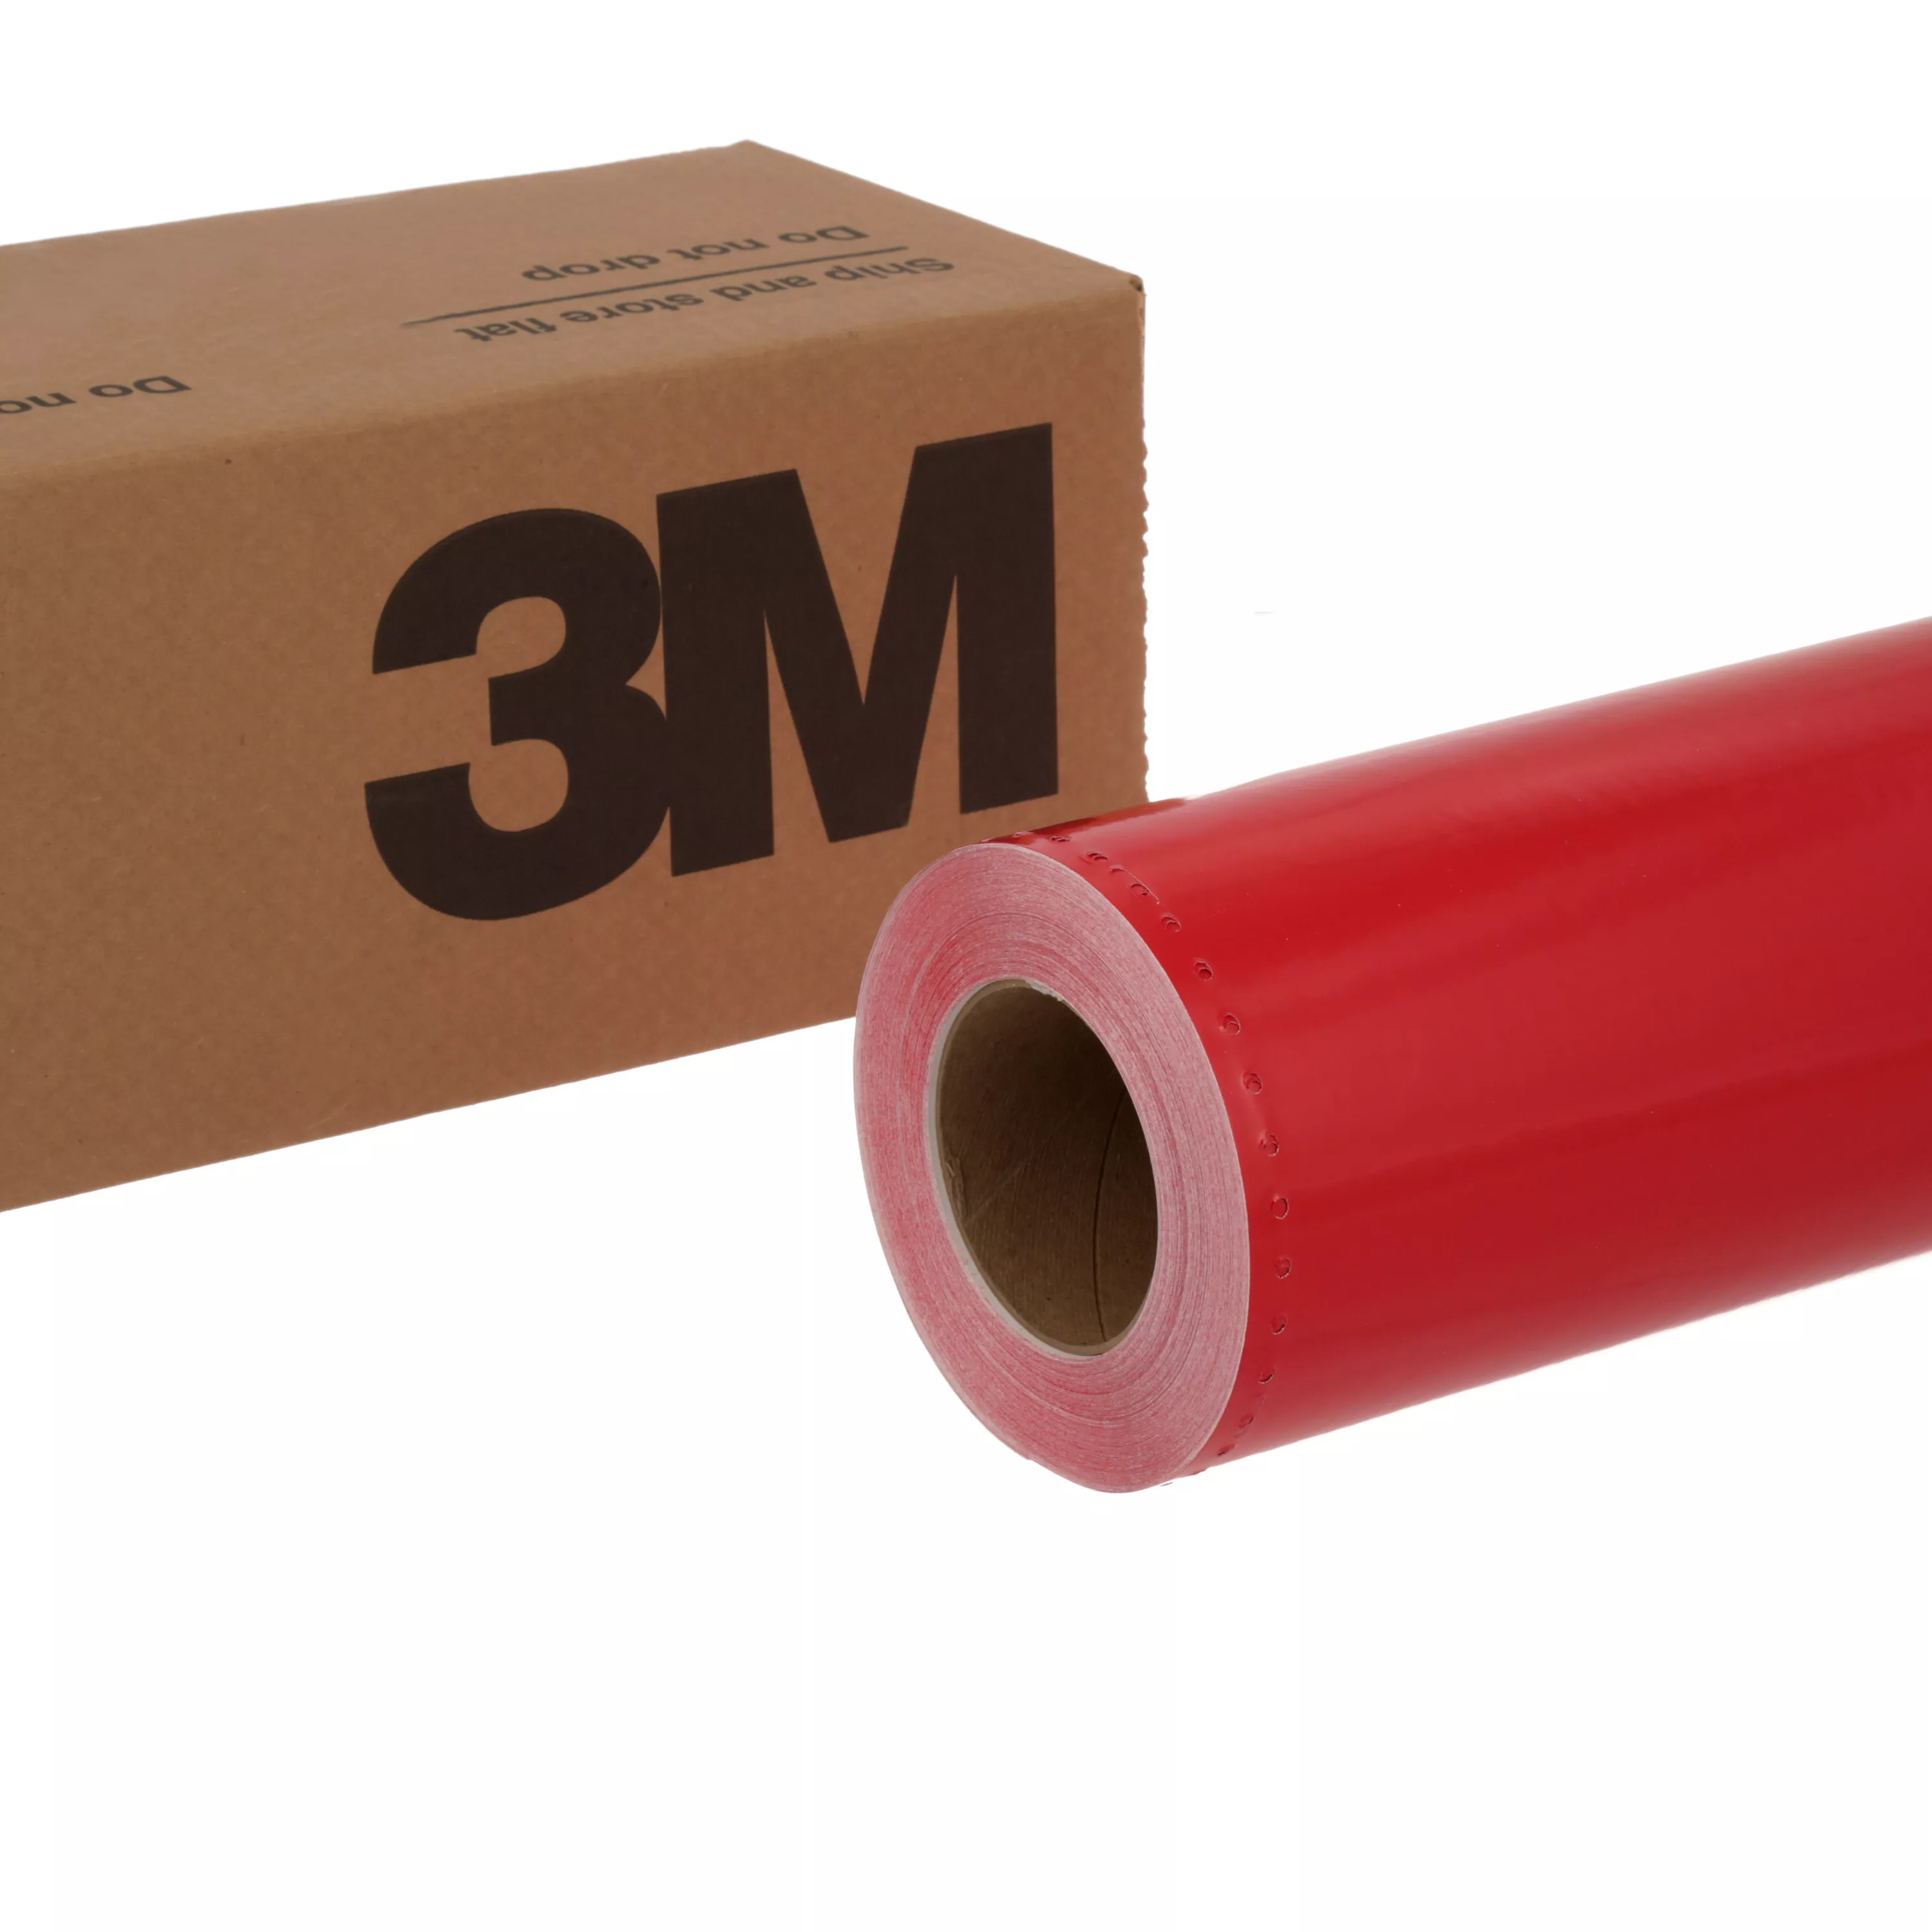 3M™ Scotchcal™ Translucent Graphic Film 3630-2519, Red, 48 in x 50 yd